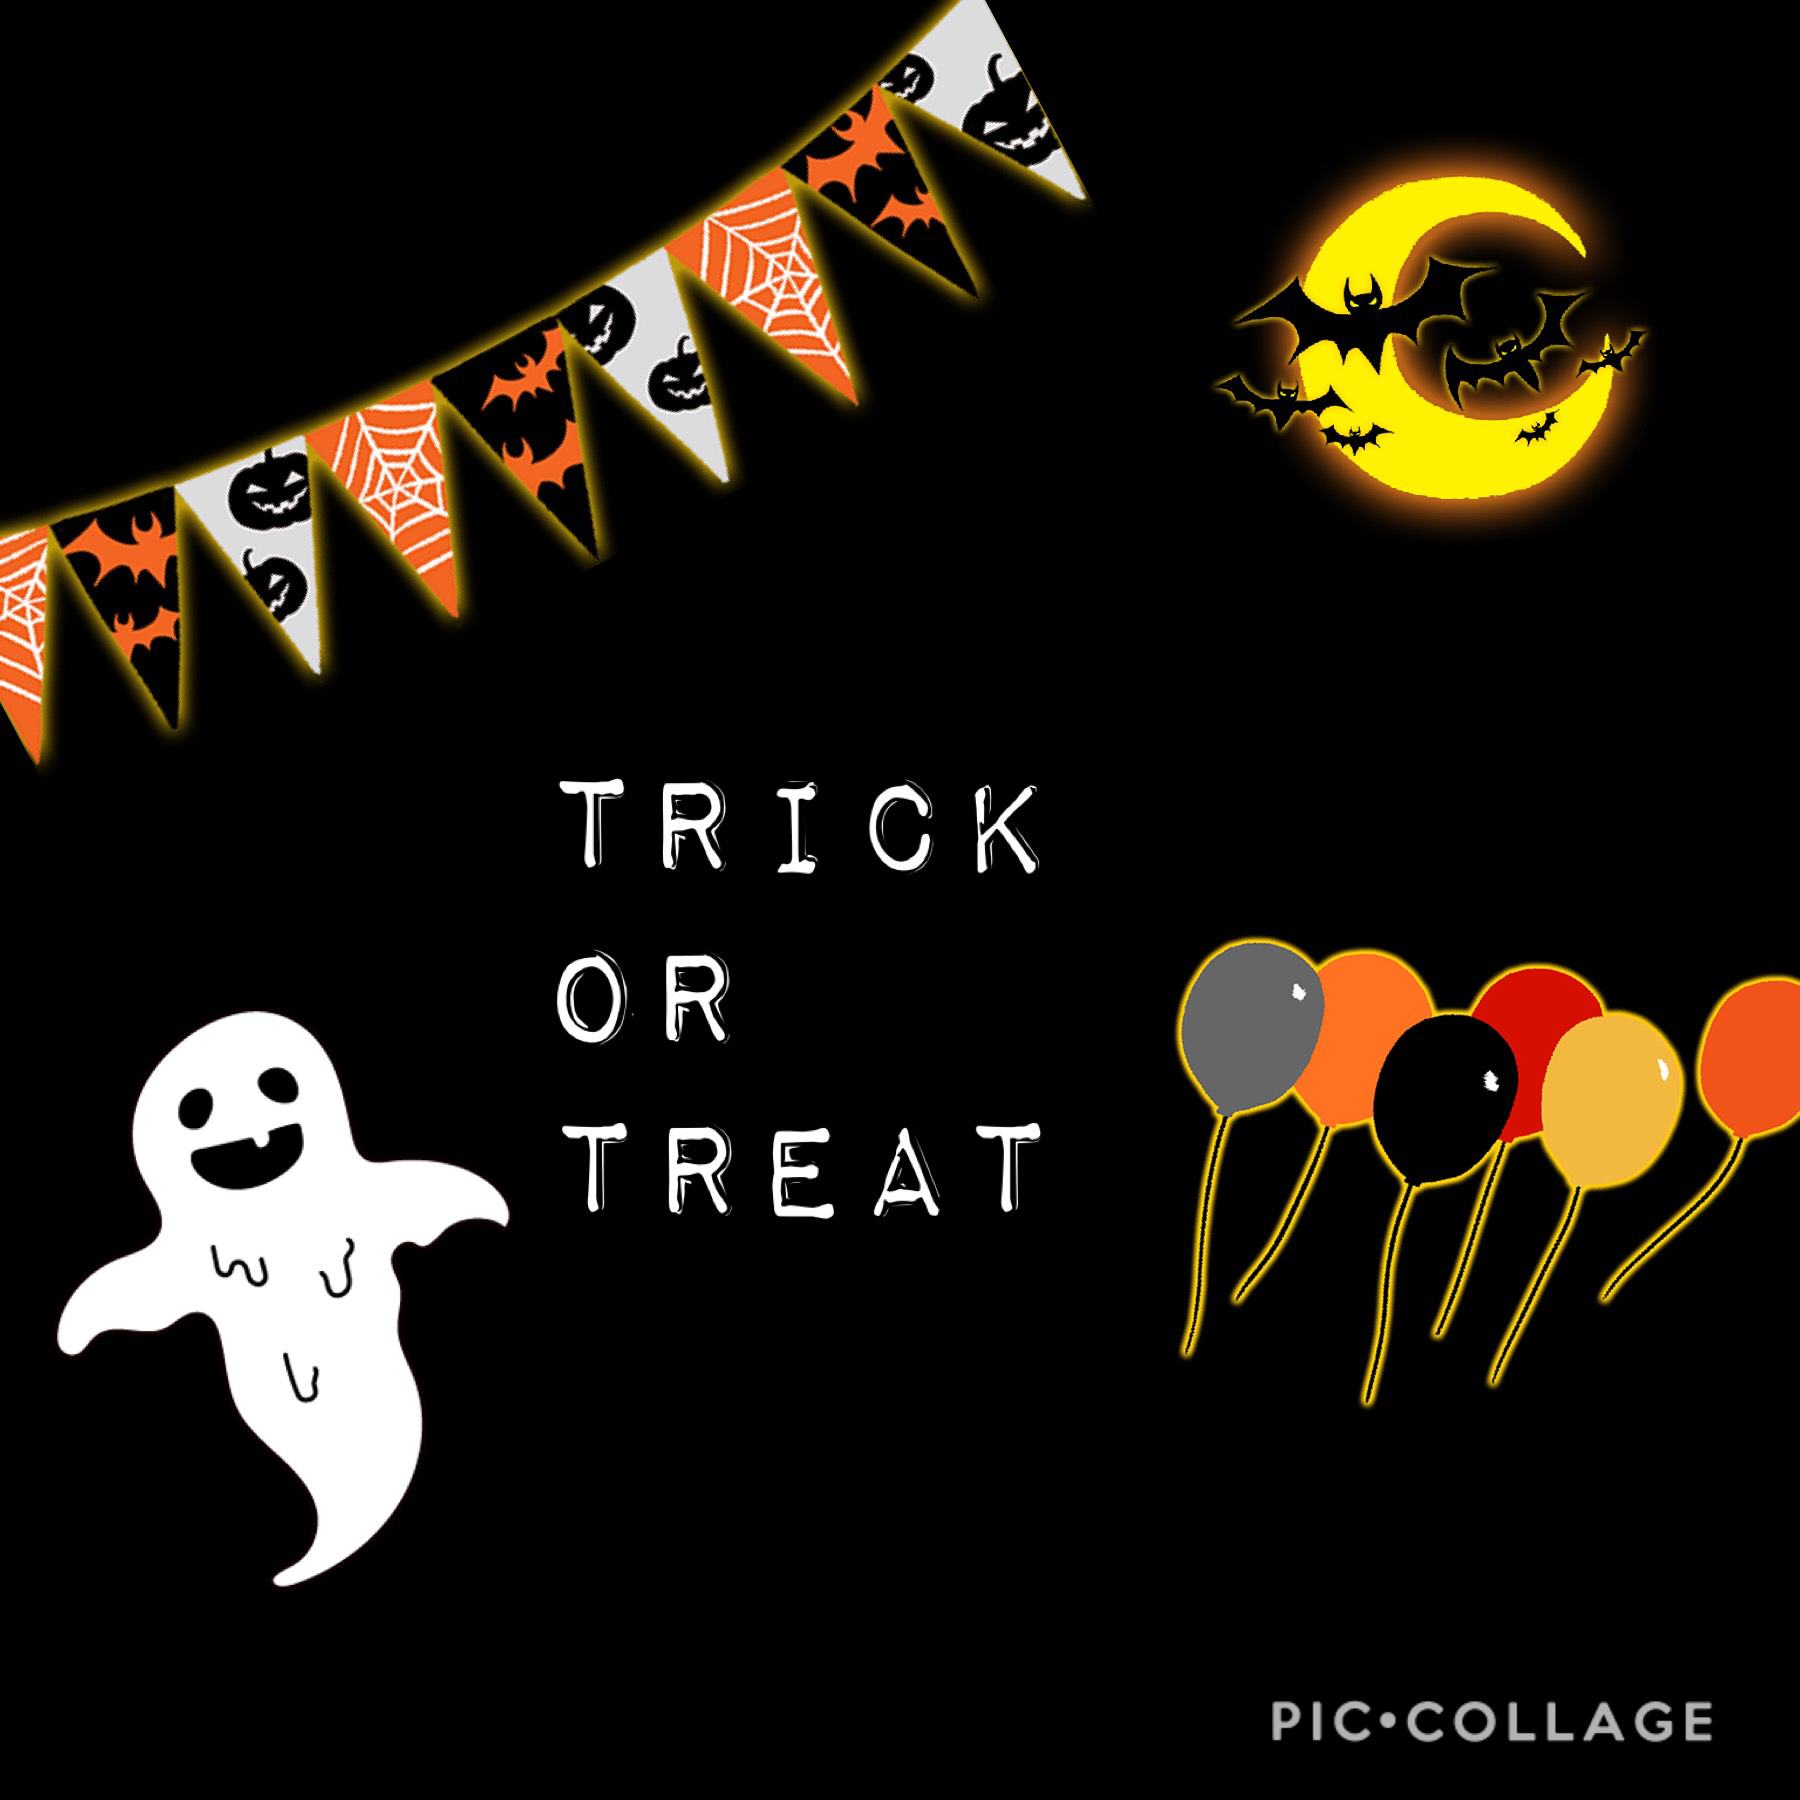 Halloween 👻 🎃 is almost here! Are u excited for trick a treating?